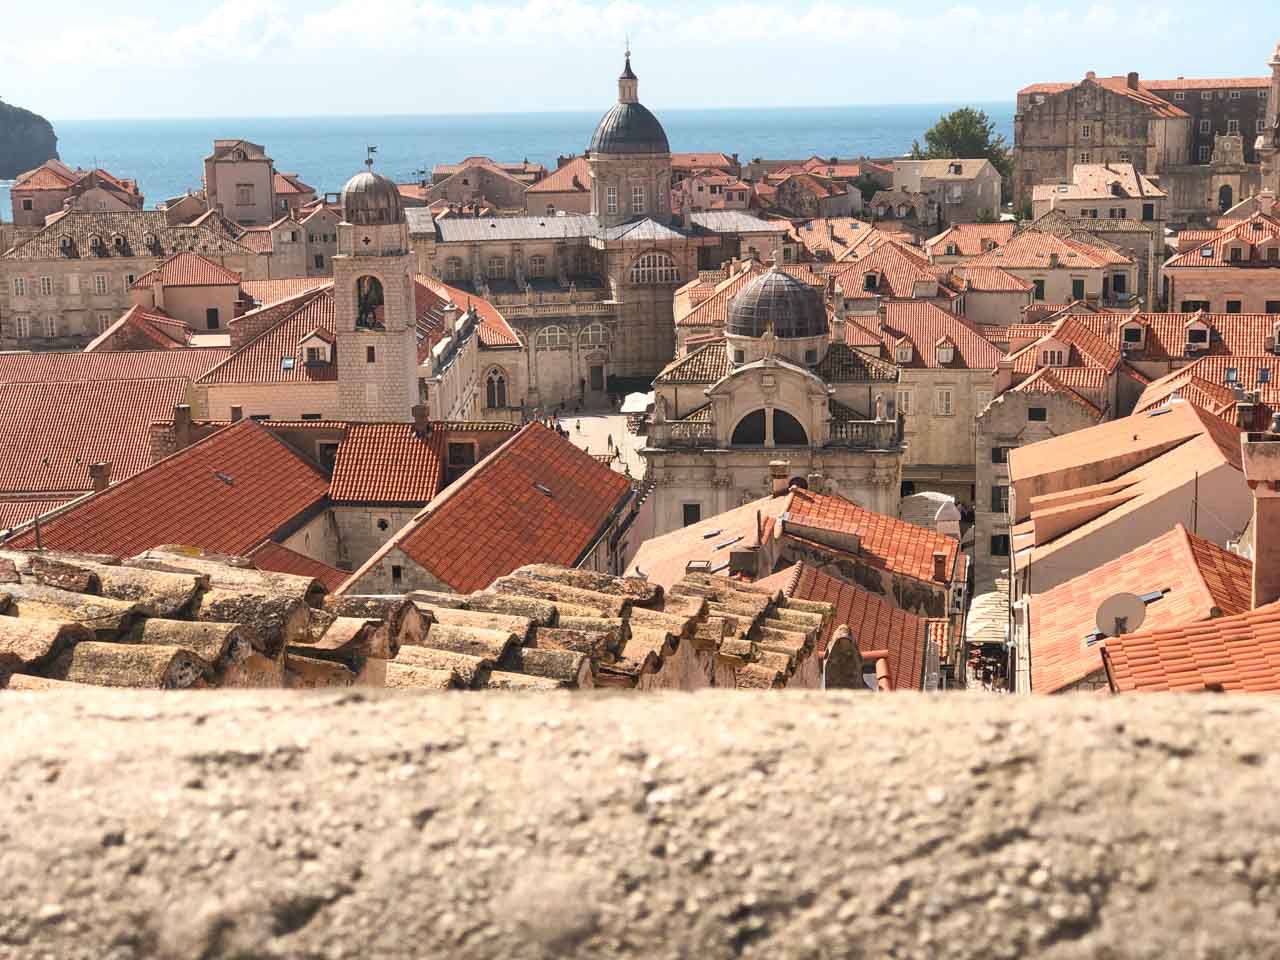 Dubrovnik Old Town seen from the top of the city walls